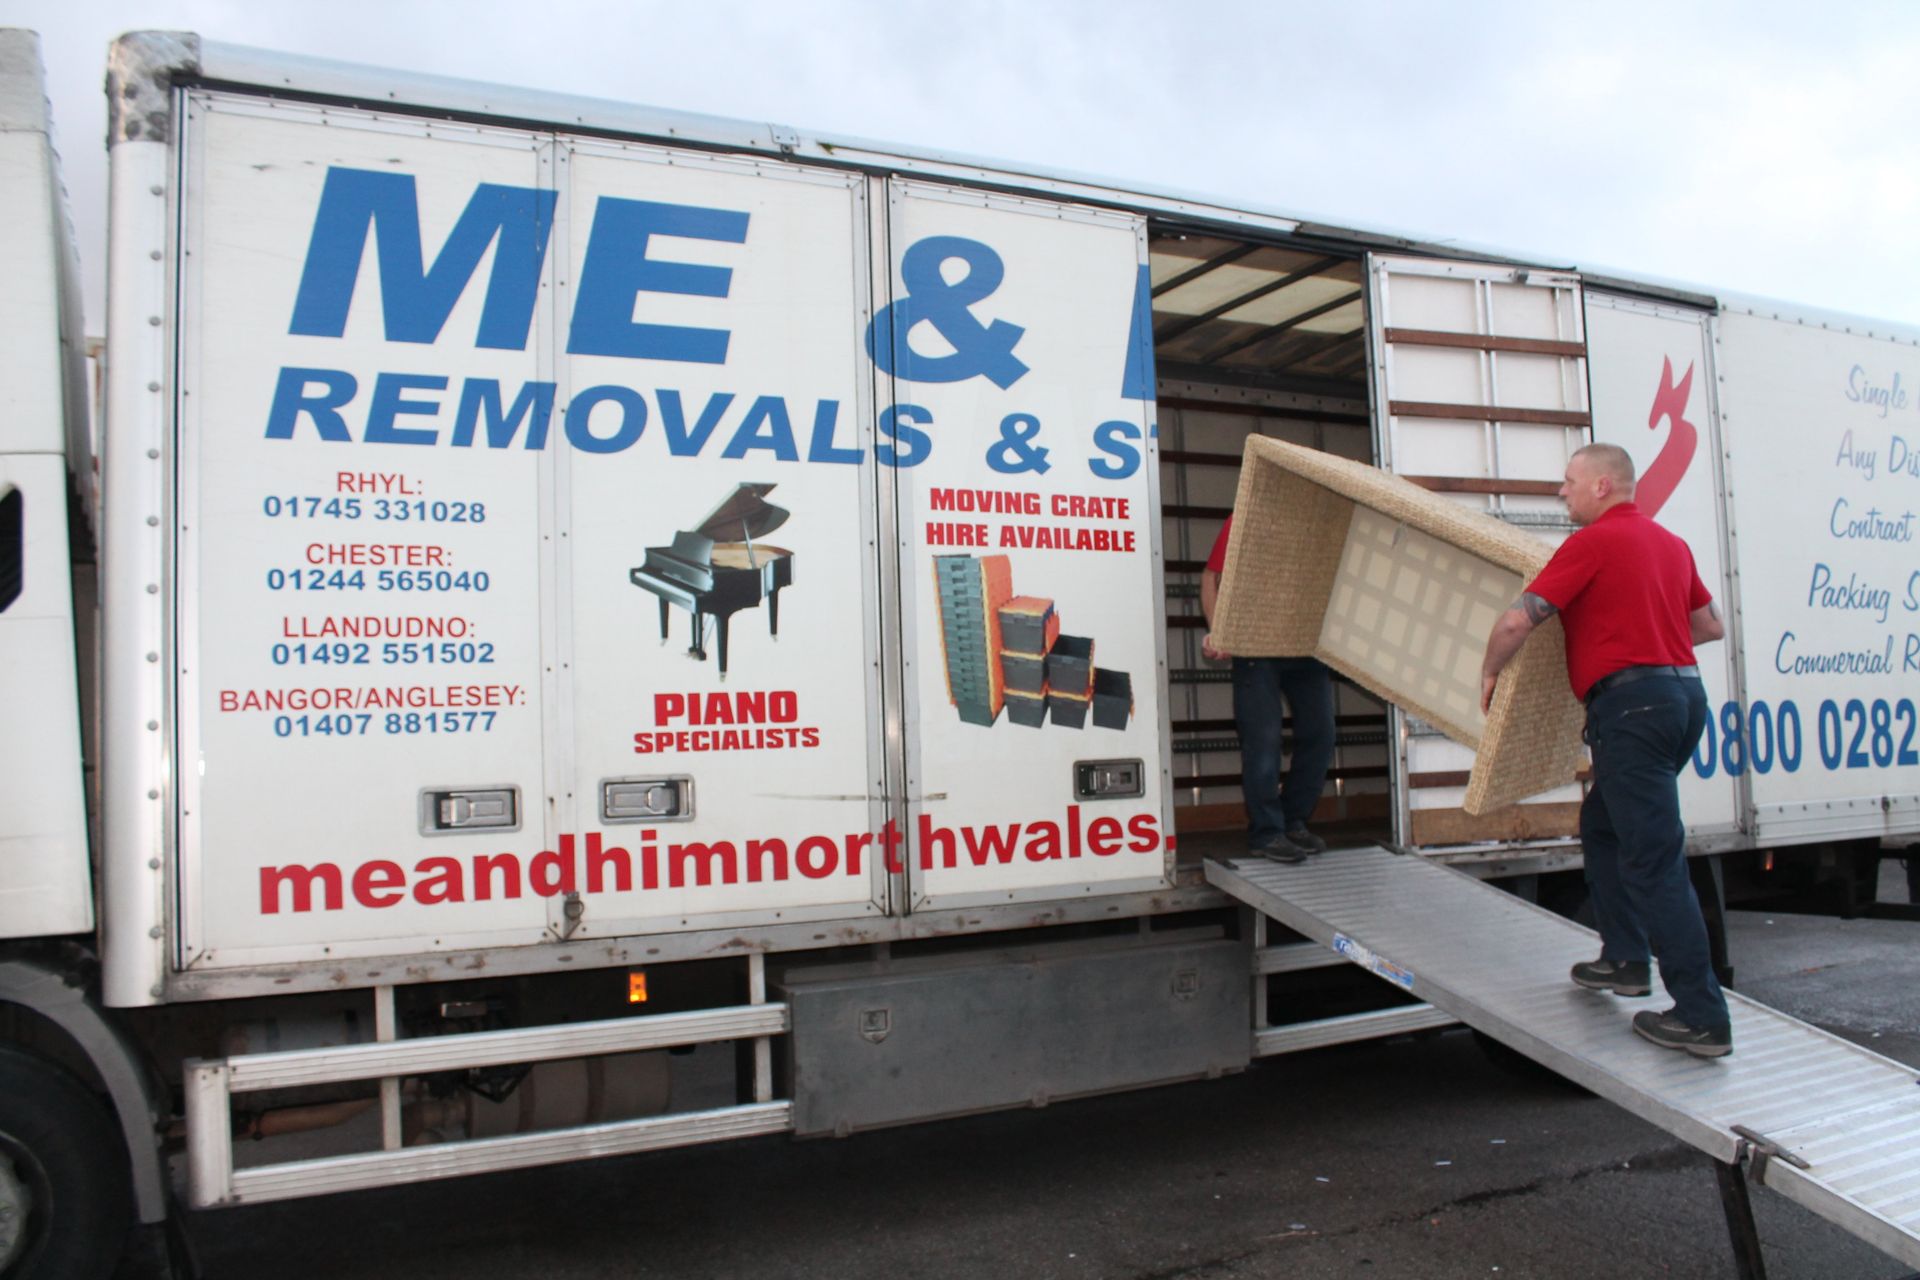 Removal services in the United Kingdom